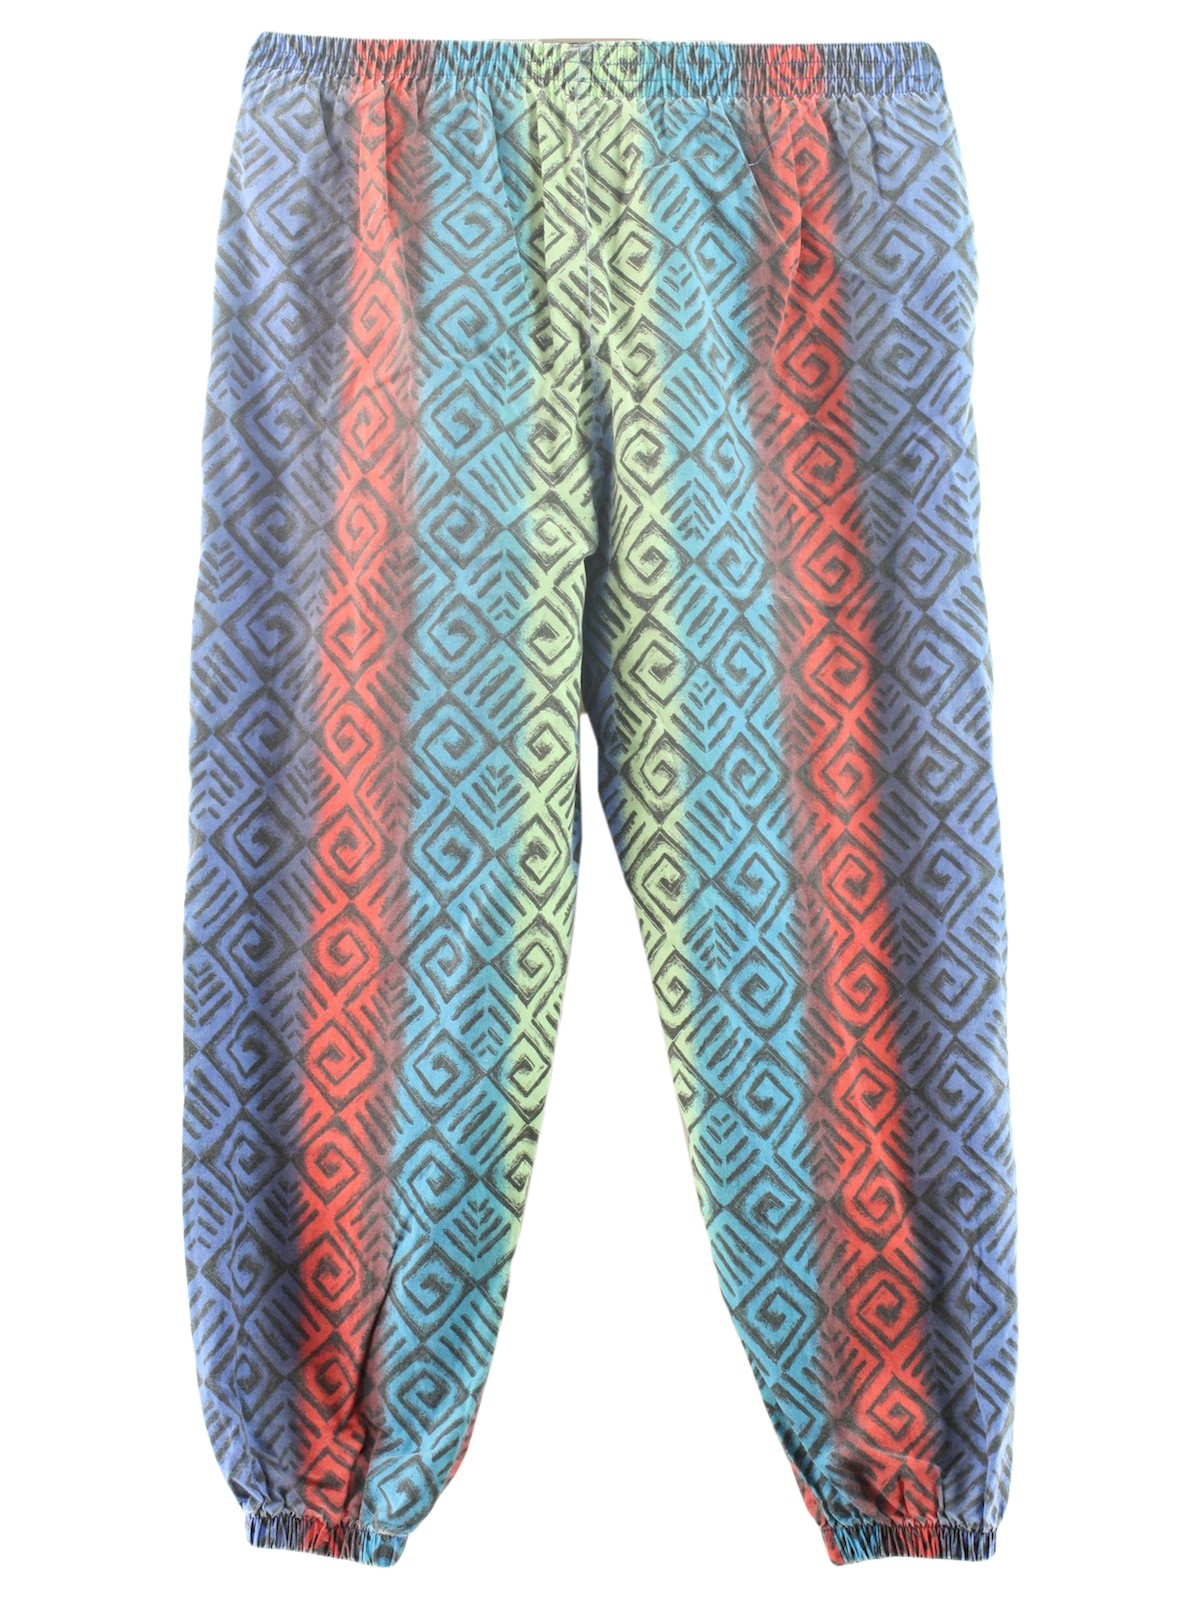 1980s Vintage Pants: 80s -Casual Boy- Mens black, red, blue, teal and ...